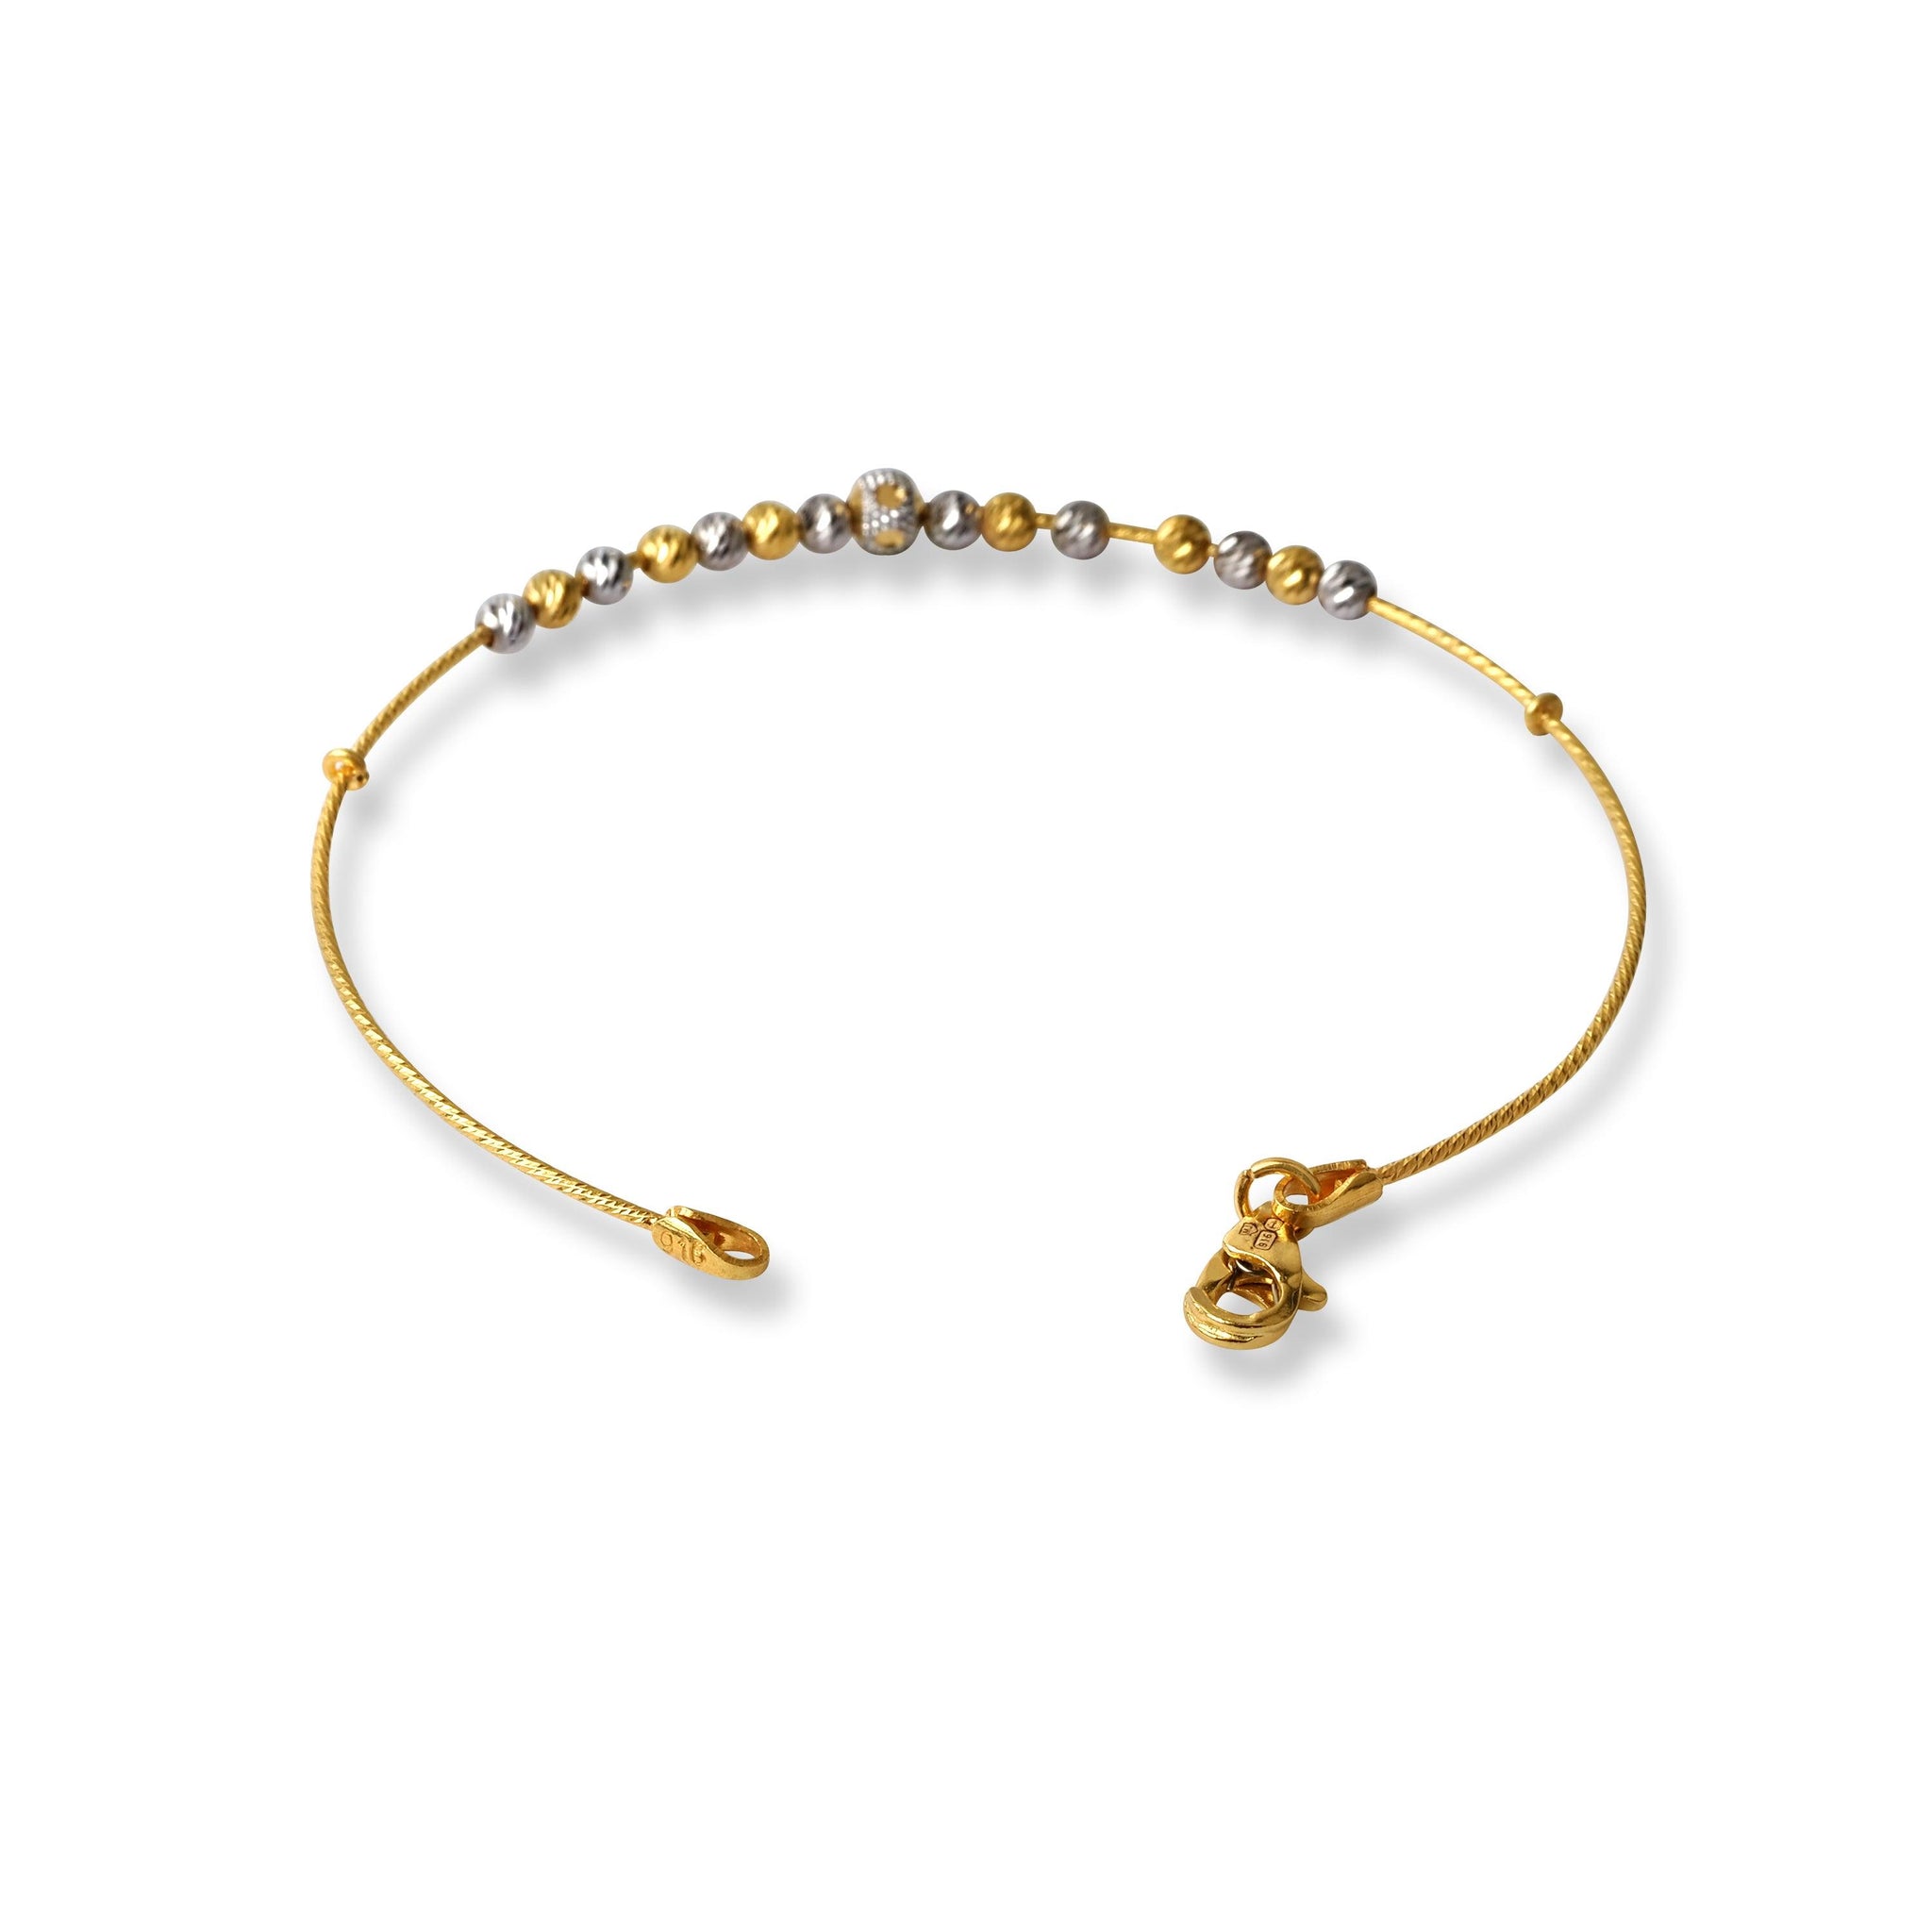 22ct Gold Rhodium Plated Beads Bangle With Rounded Trigger Clasp (4.1g) B-8523